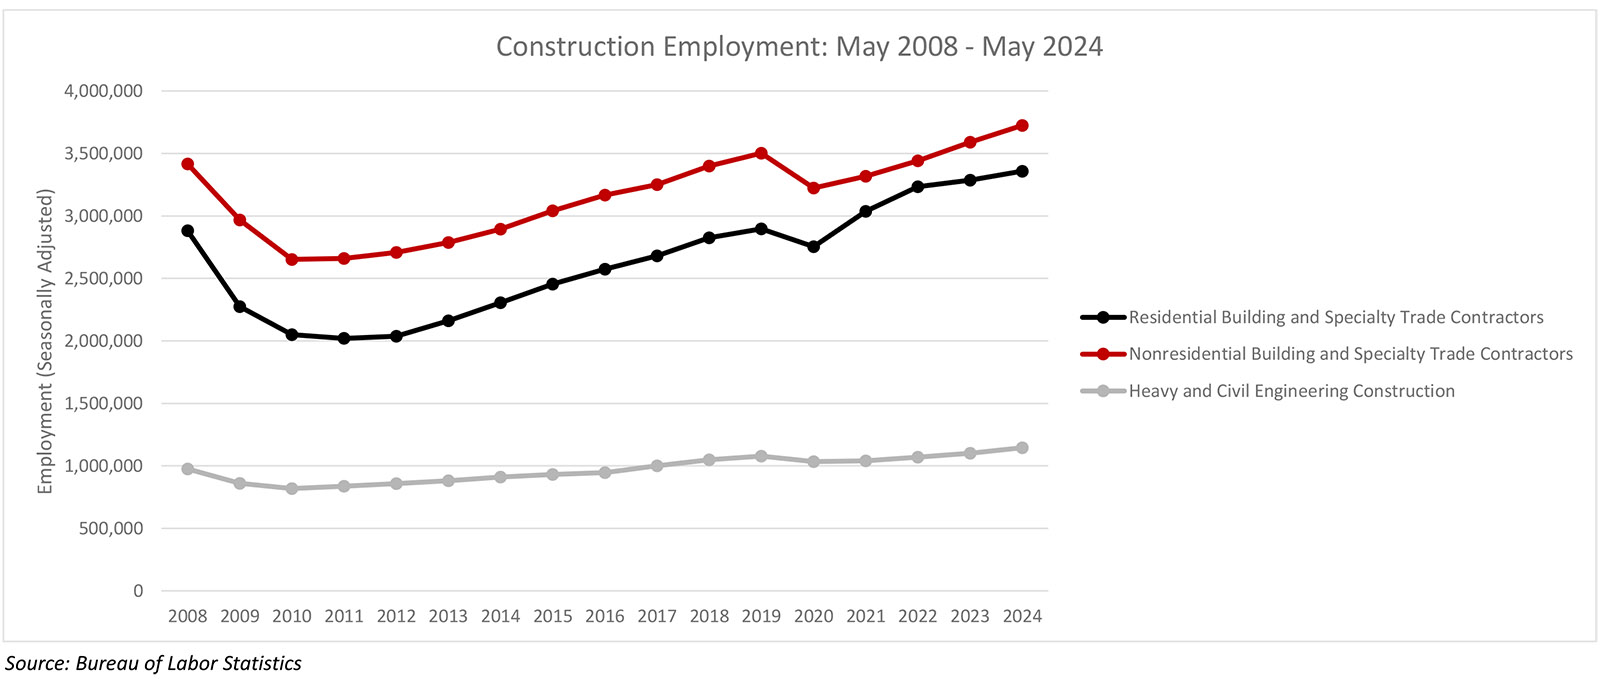 Nonresidential Construction Adds 17,100 Jobs in May